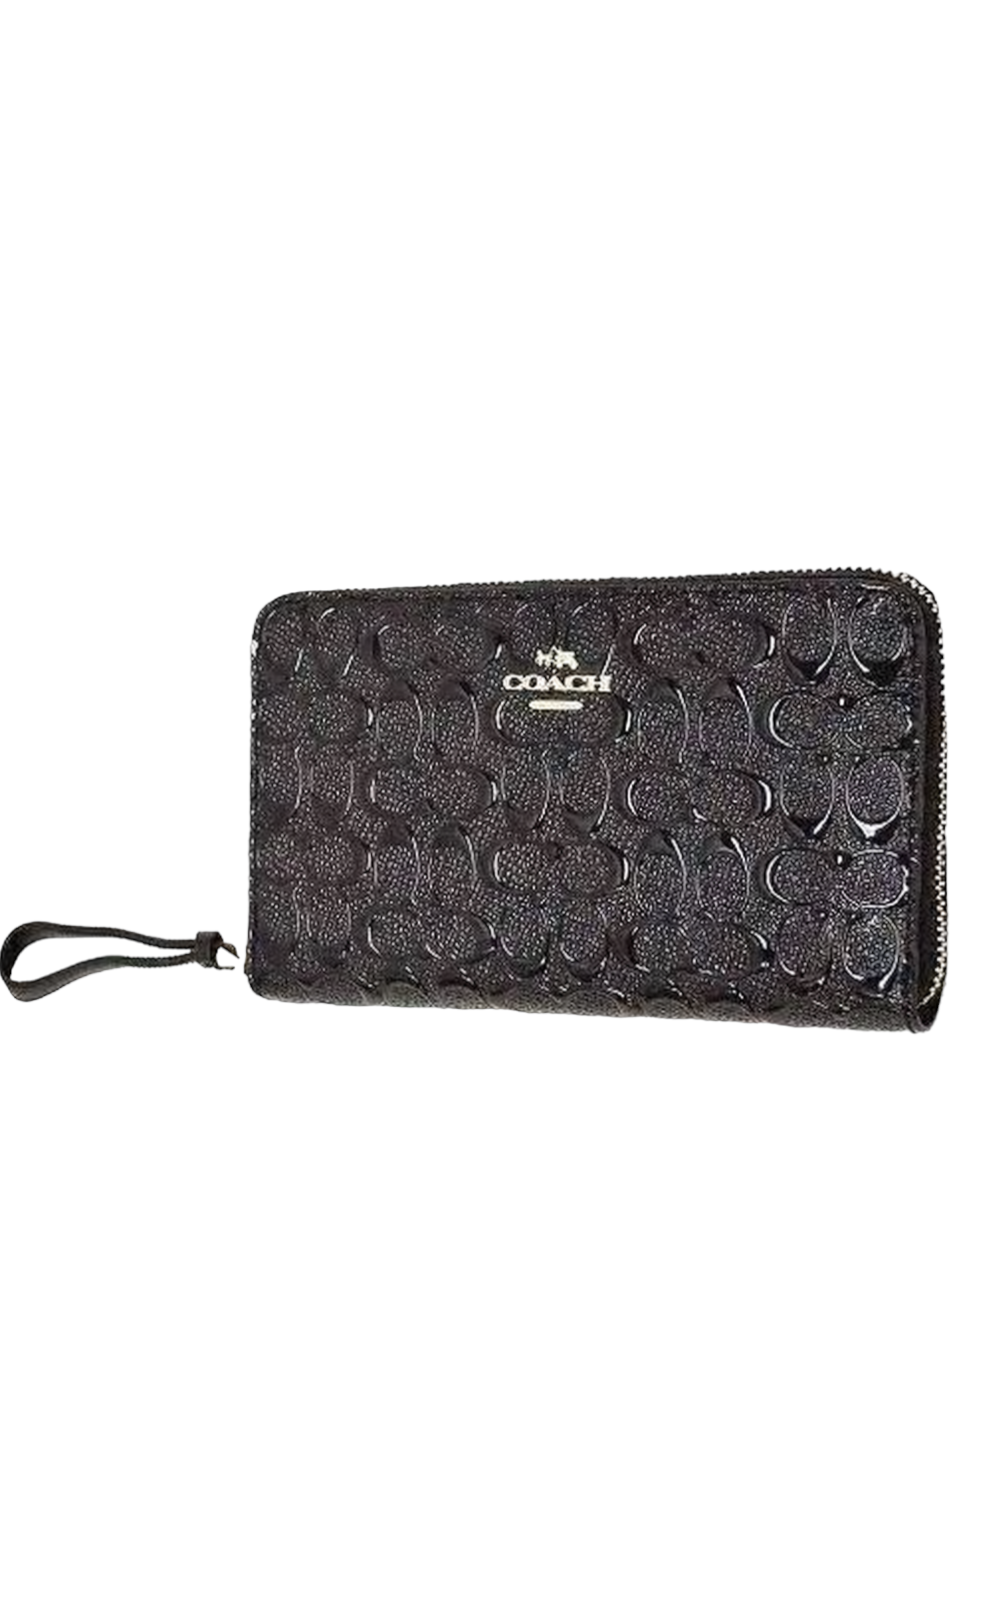 Coach Phone Wallet -Style F57469